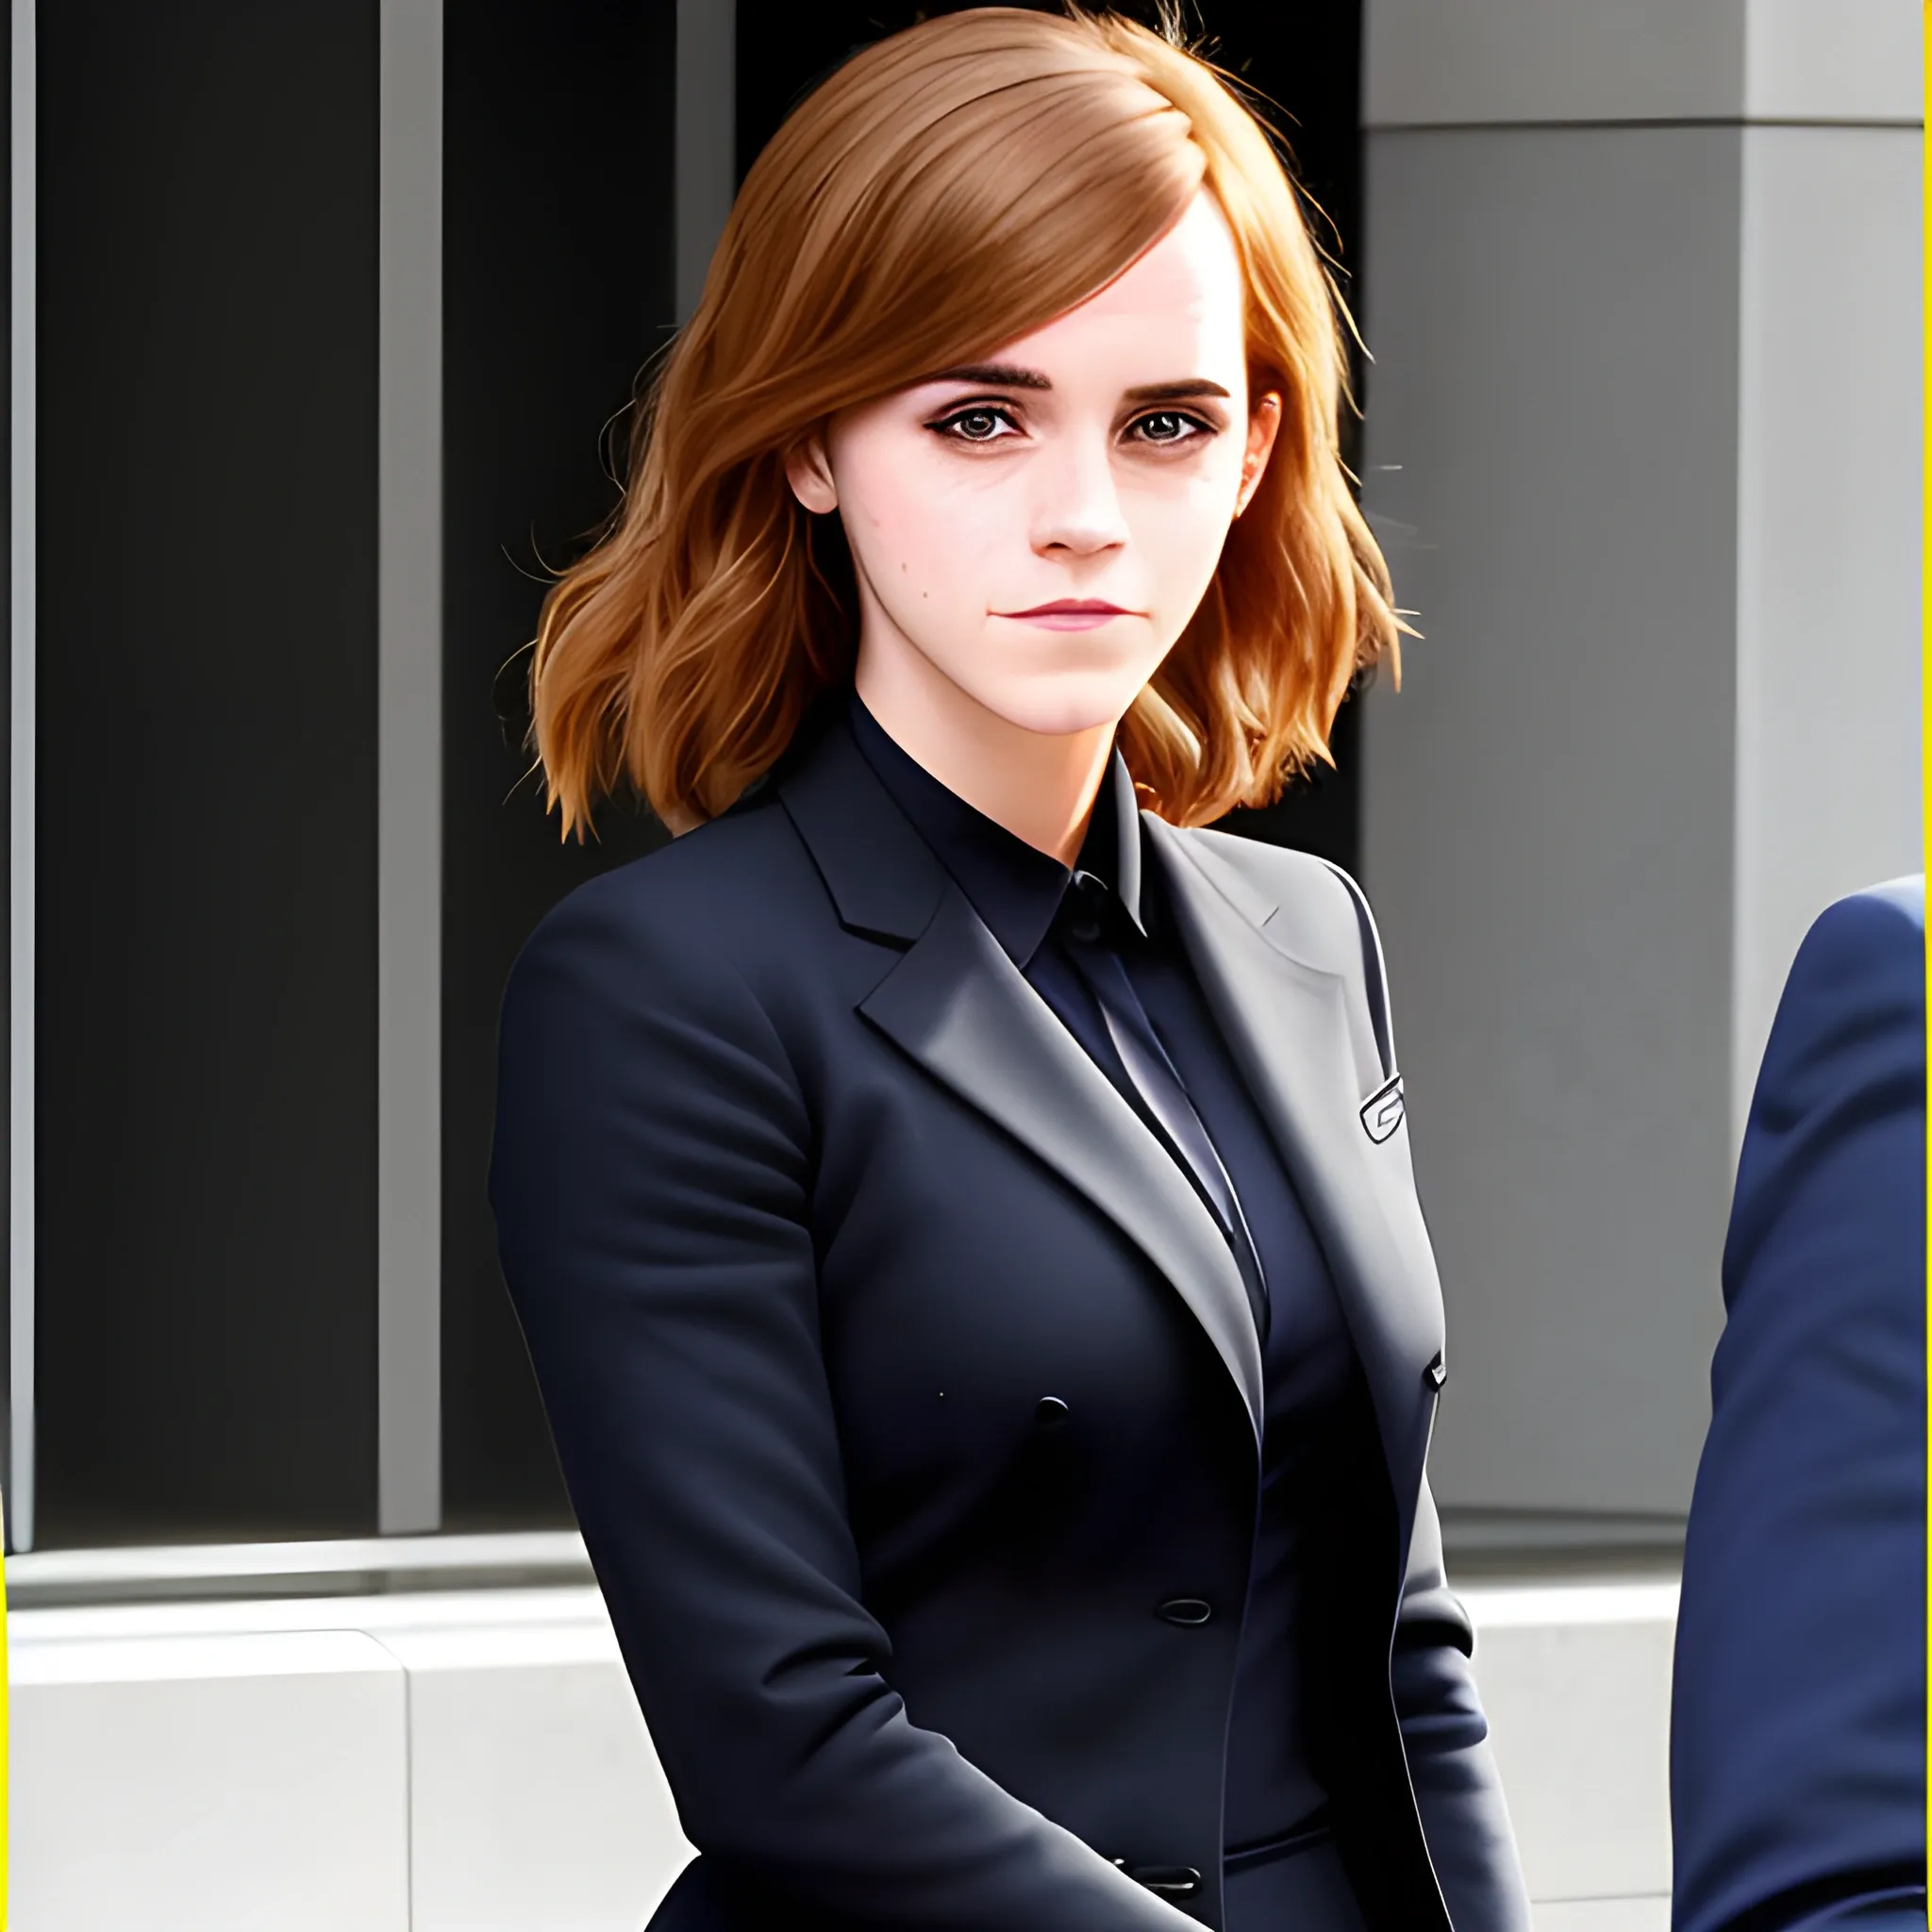 take full body photo of famous young actress named emma watson in school uniform